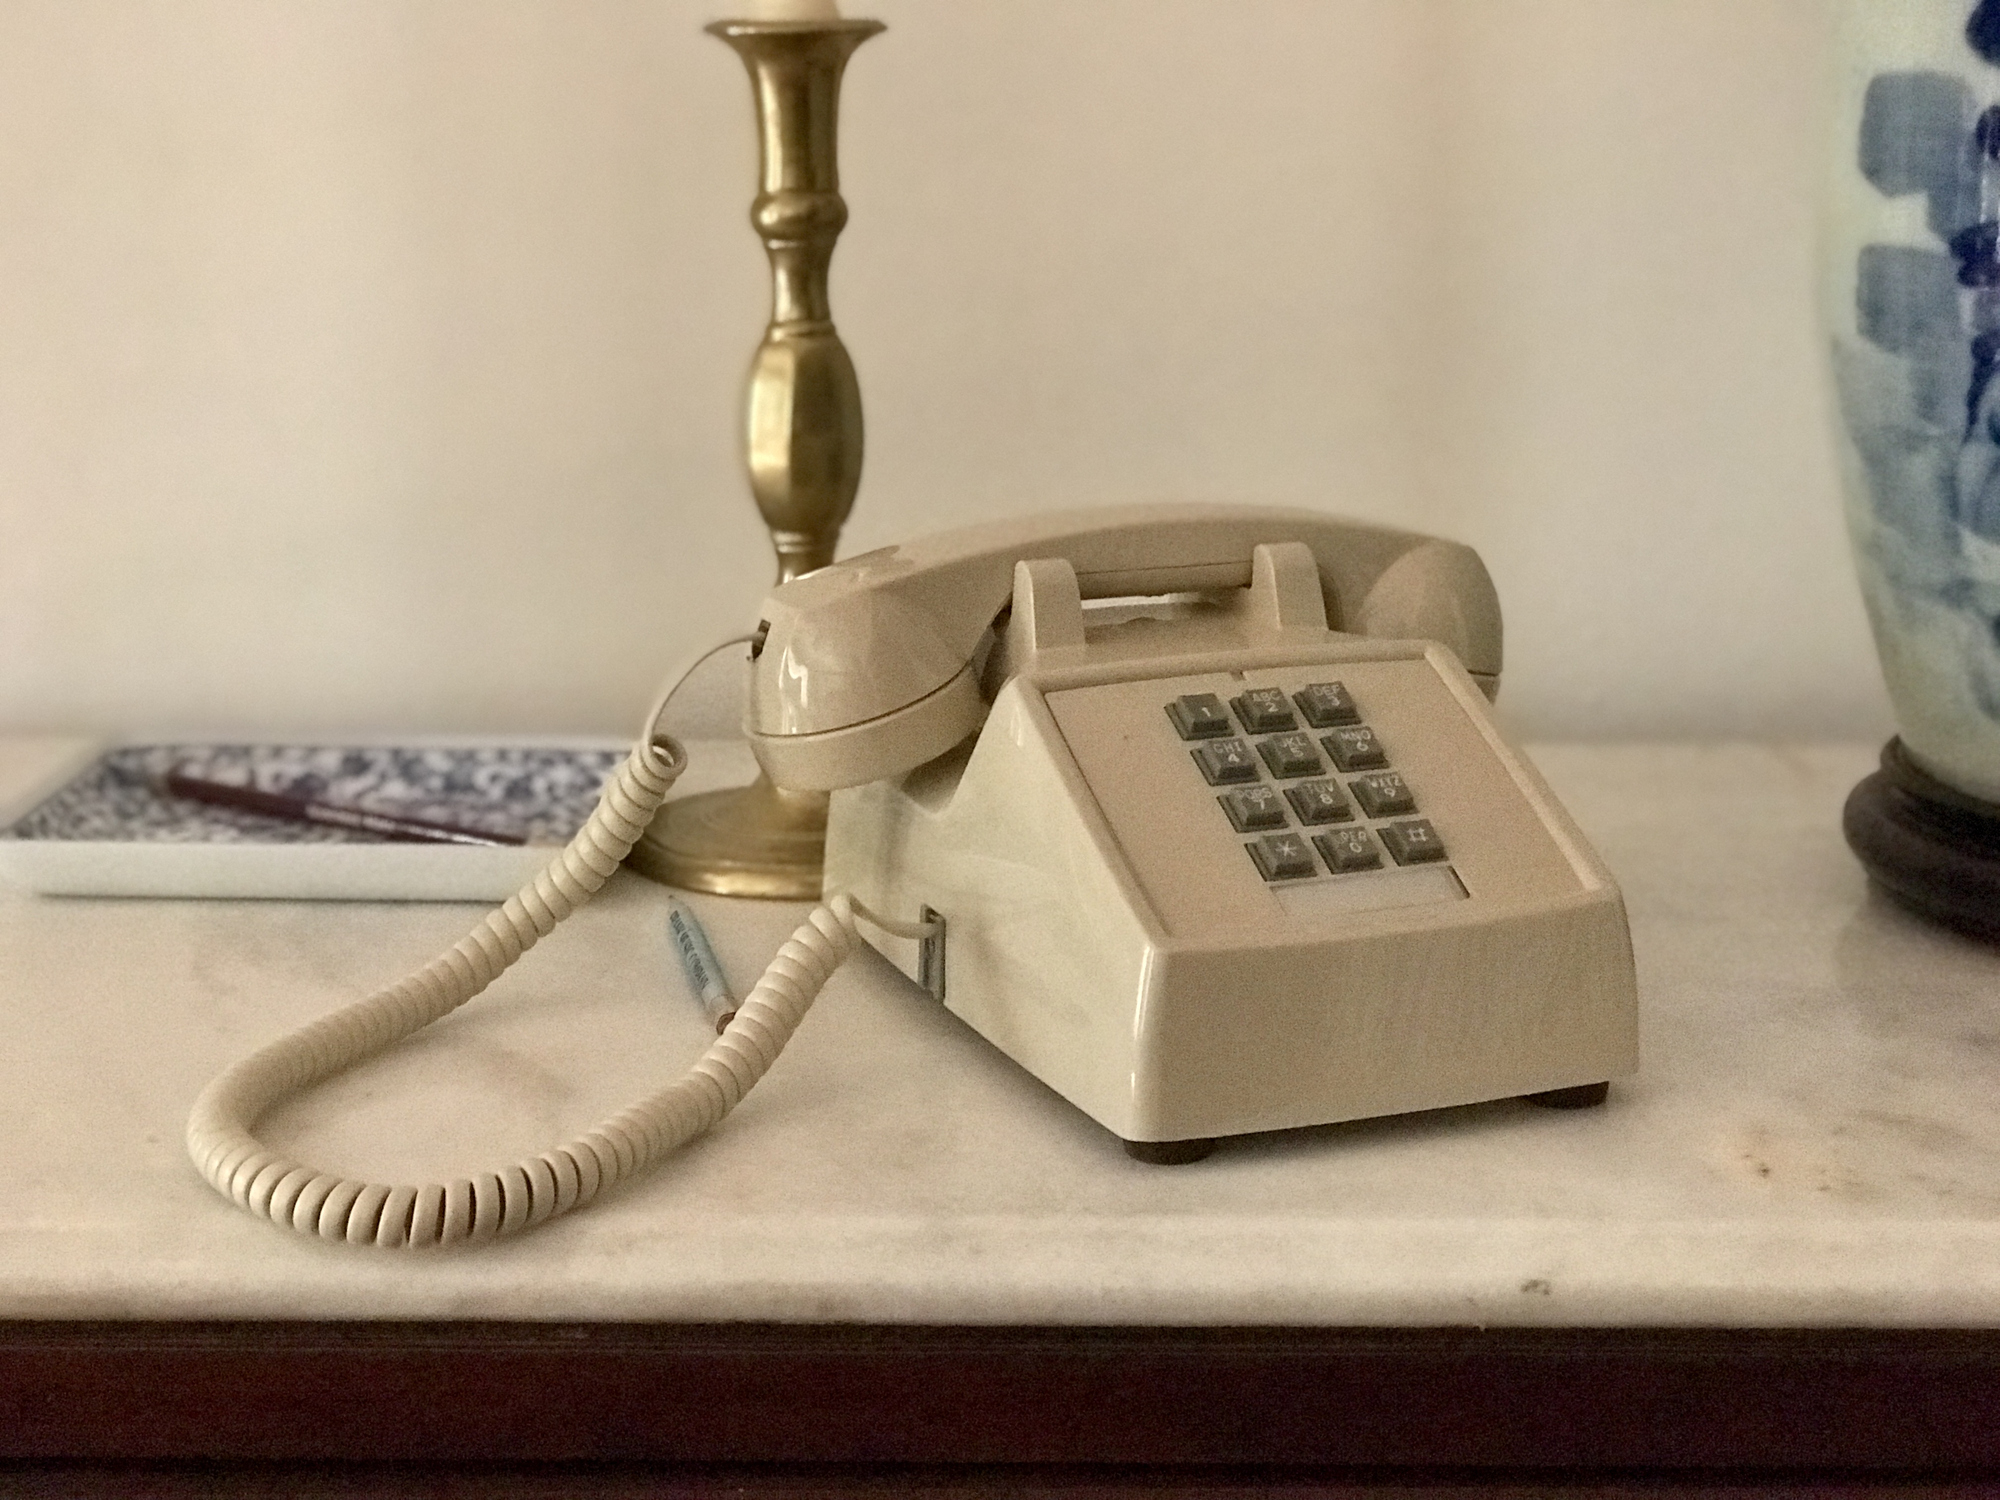 An old-school corded telephone is sitting on a nightstand